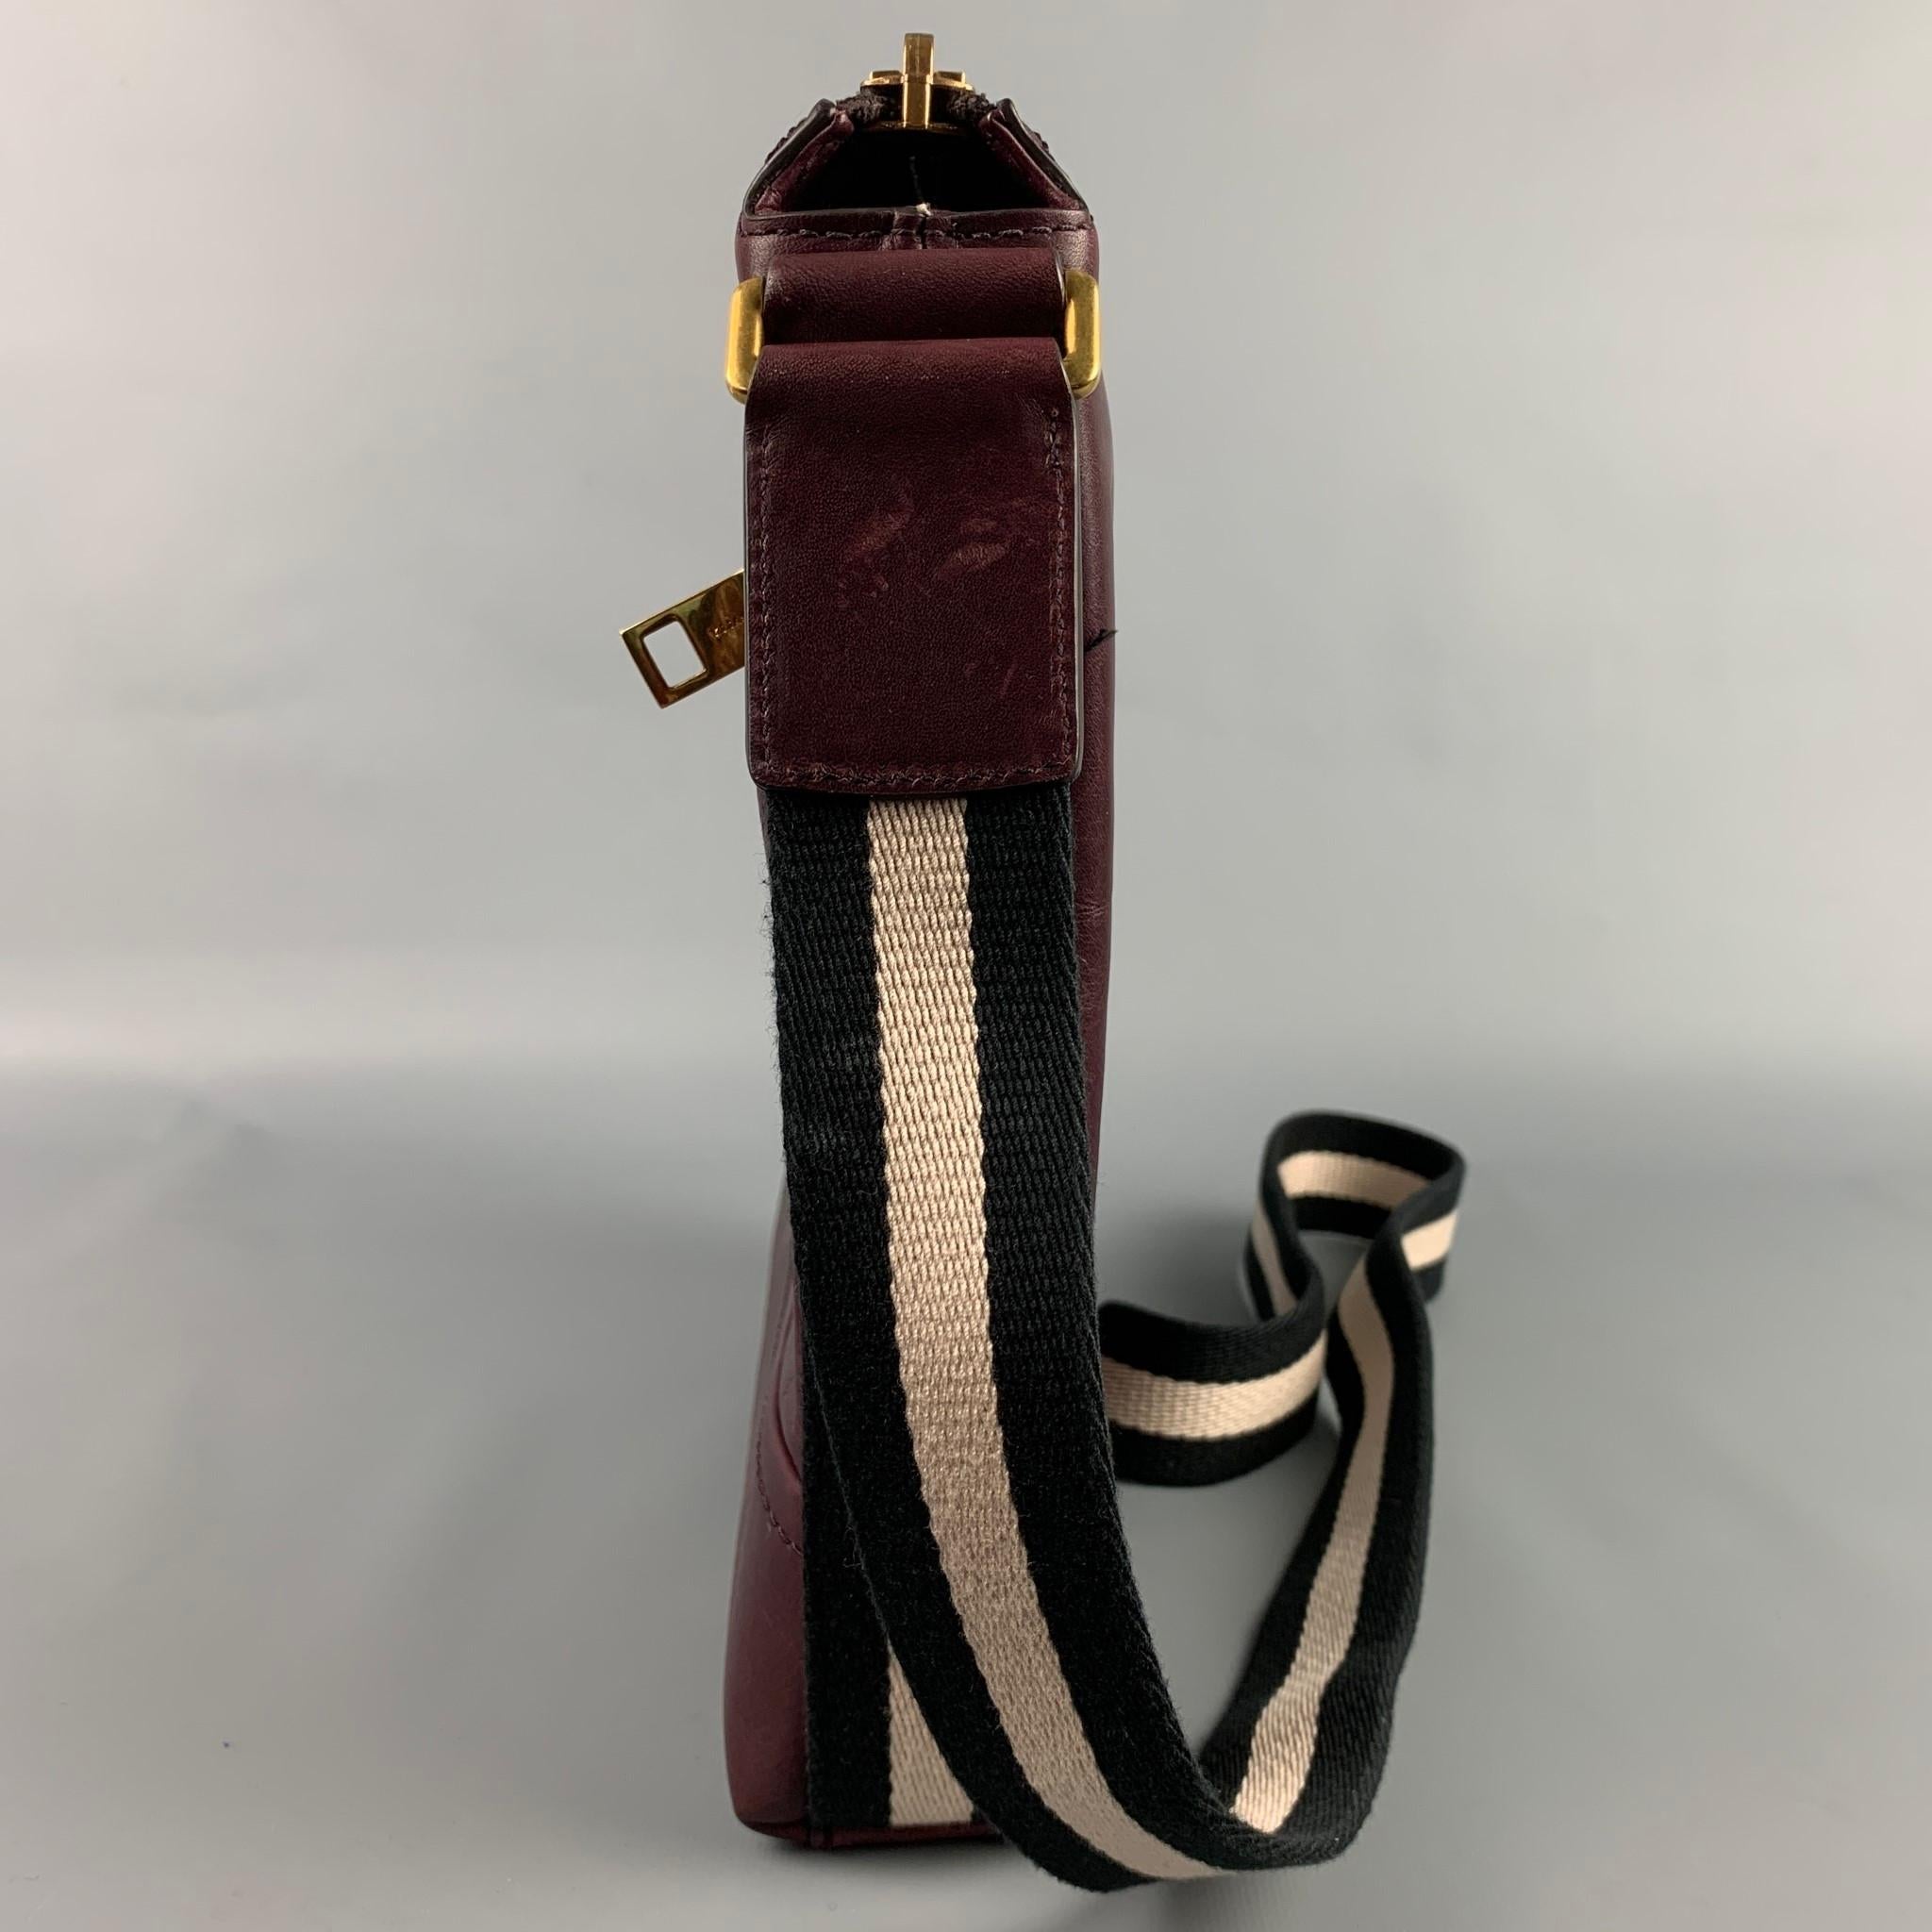 BALLY bag comes in a burgundy leather featuring a cross body style, gold tone hard ware, stripe trim, front pocket, inner pocket, and a zipper closure. 

Good Pre-Owned Condition.

Measurements:

Length: 9.5 in.
Width: 2 in.
Height: 10 in.
Drop: